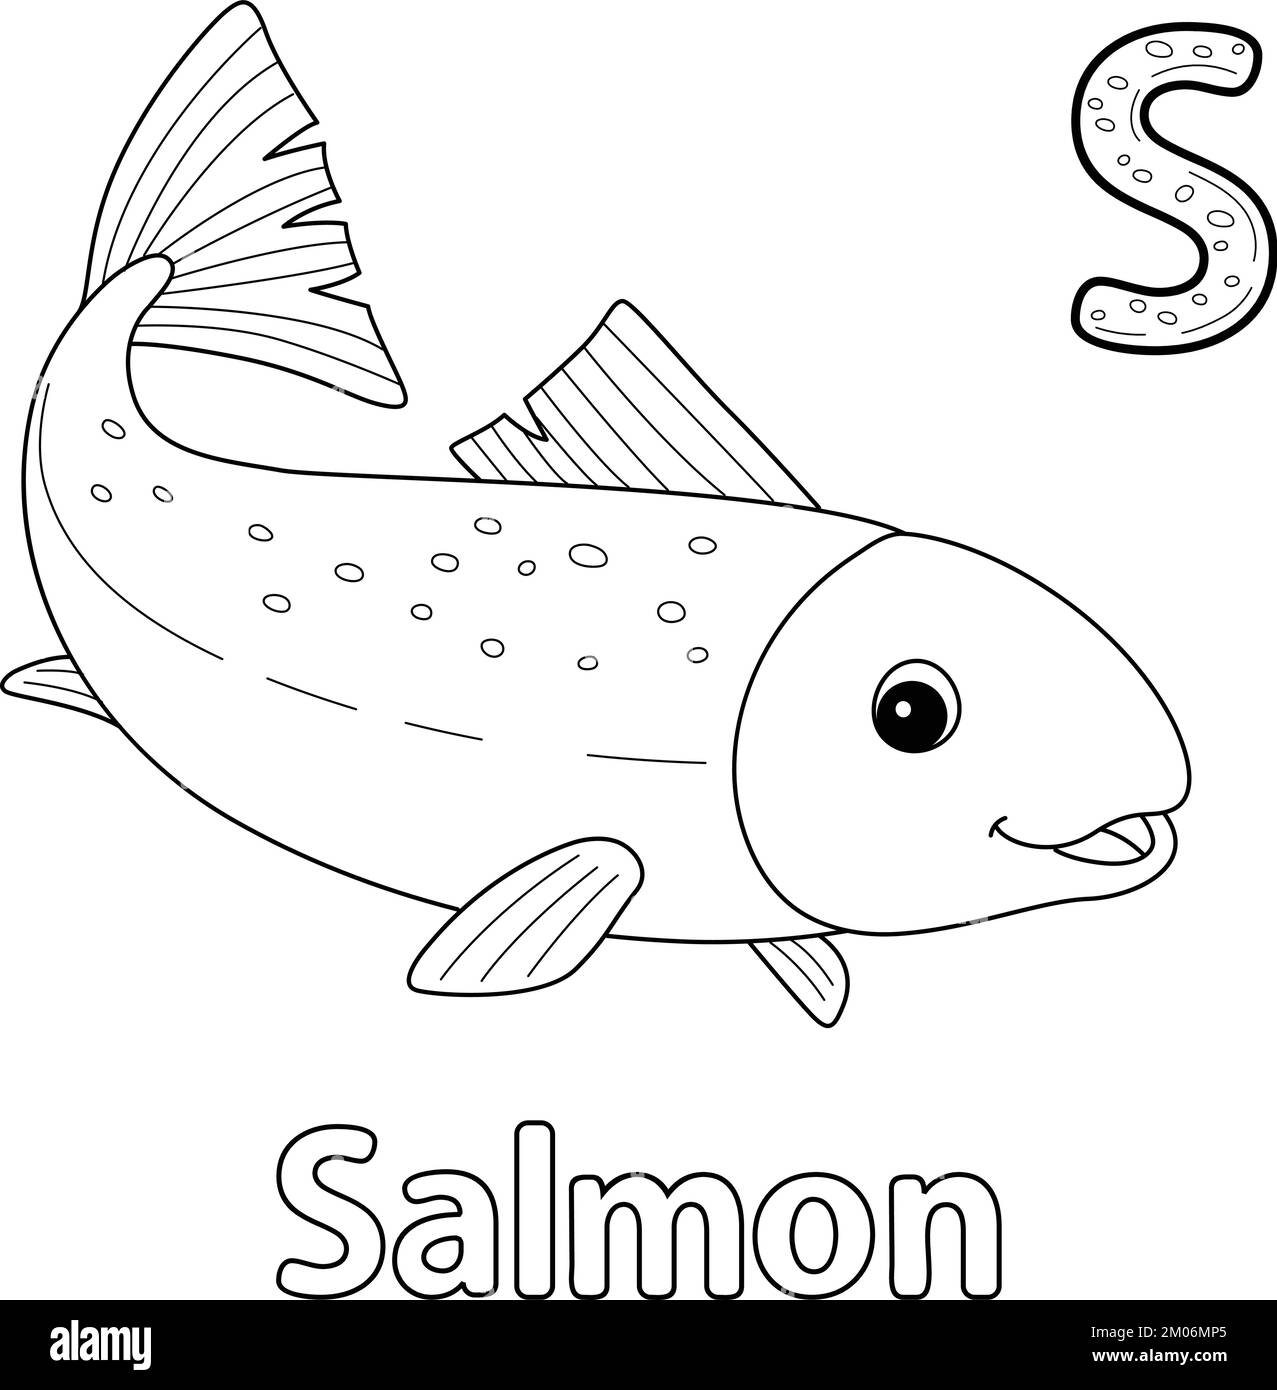 Salmon Animal Alphabet ABC Isolated Coloring S Stock Vector